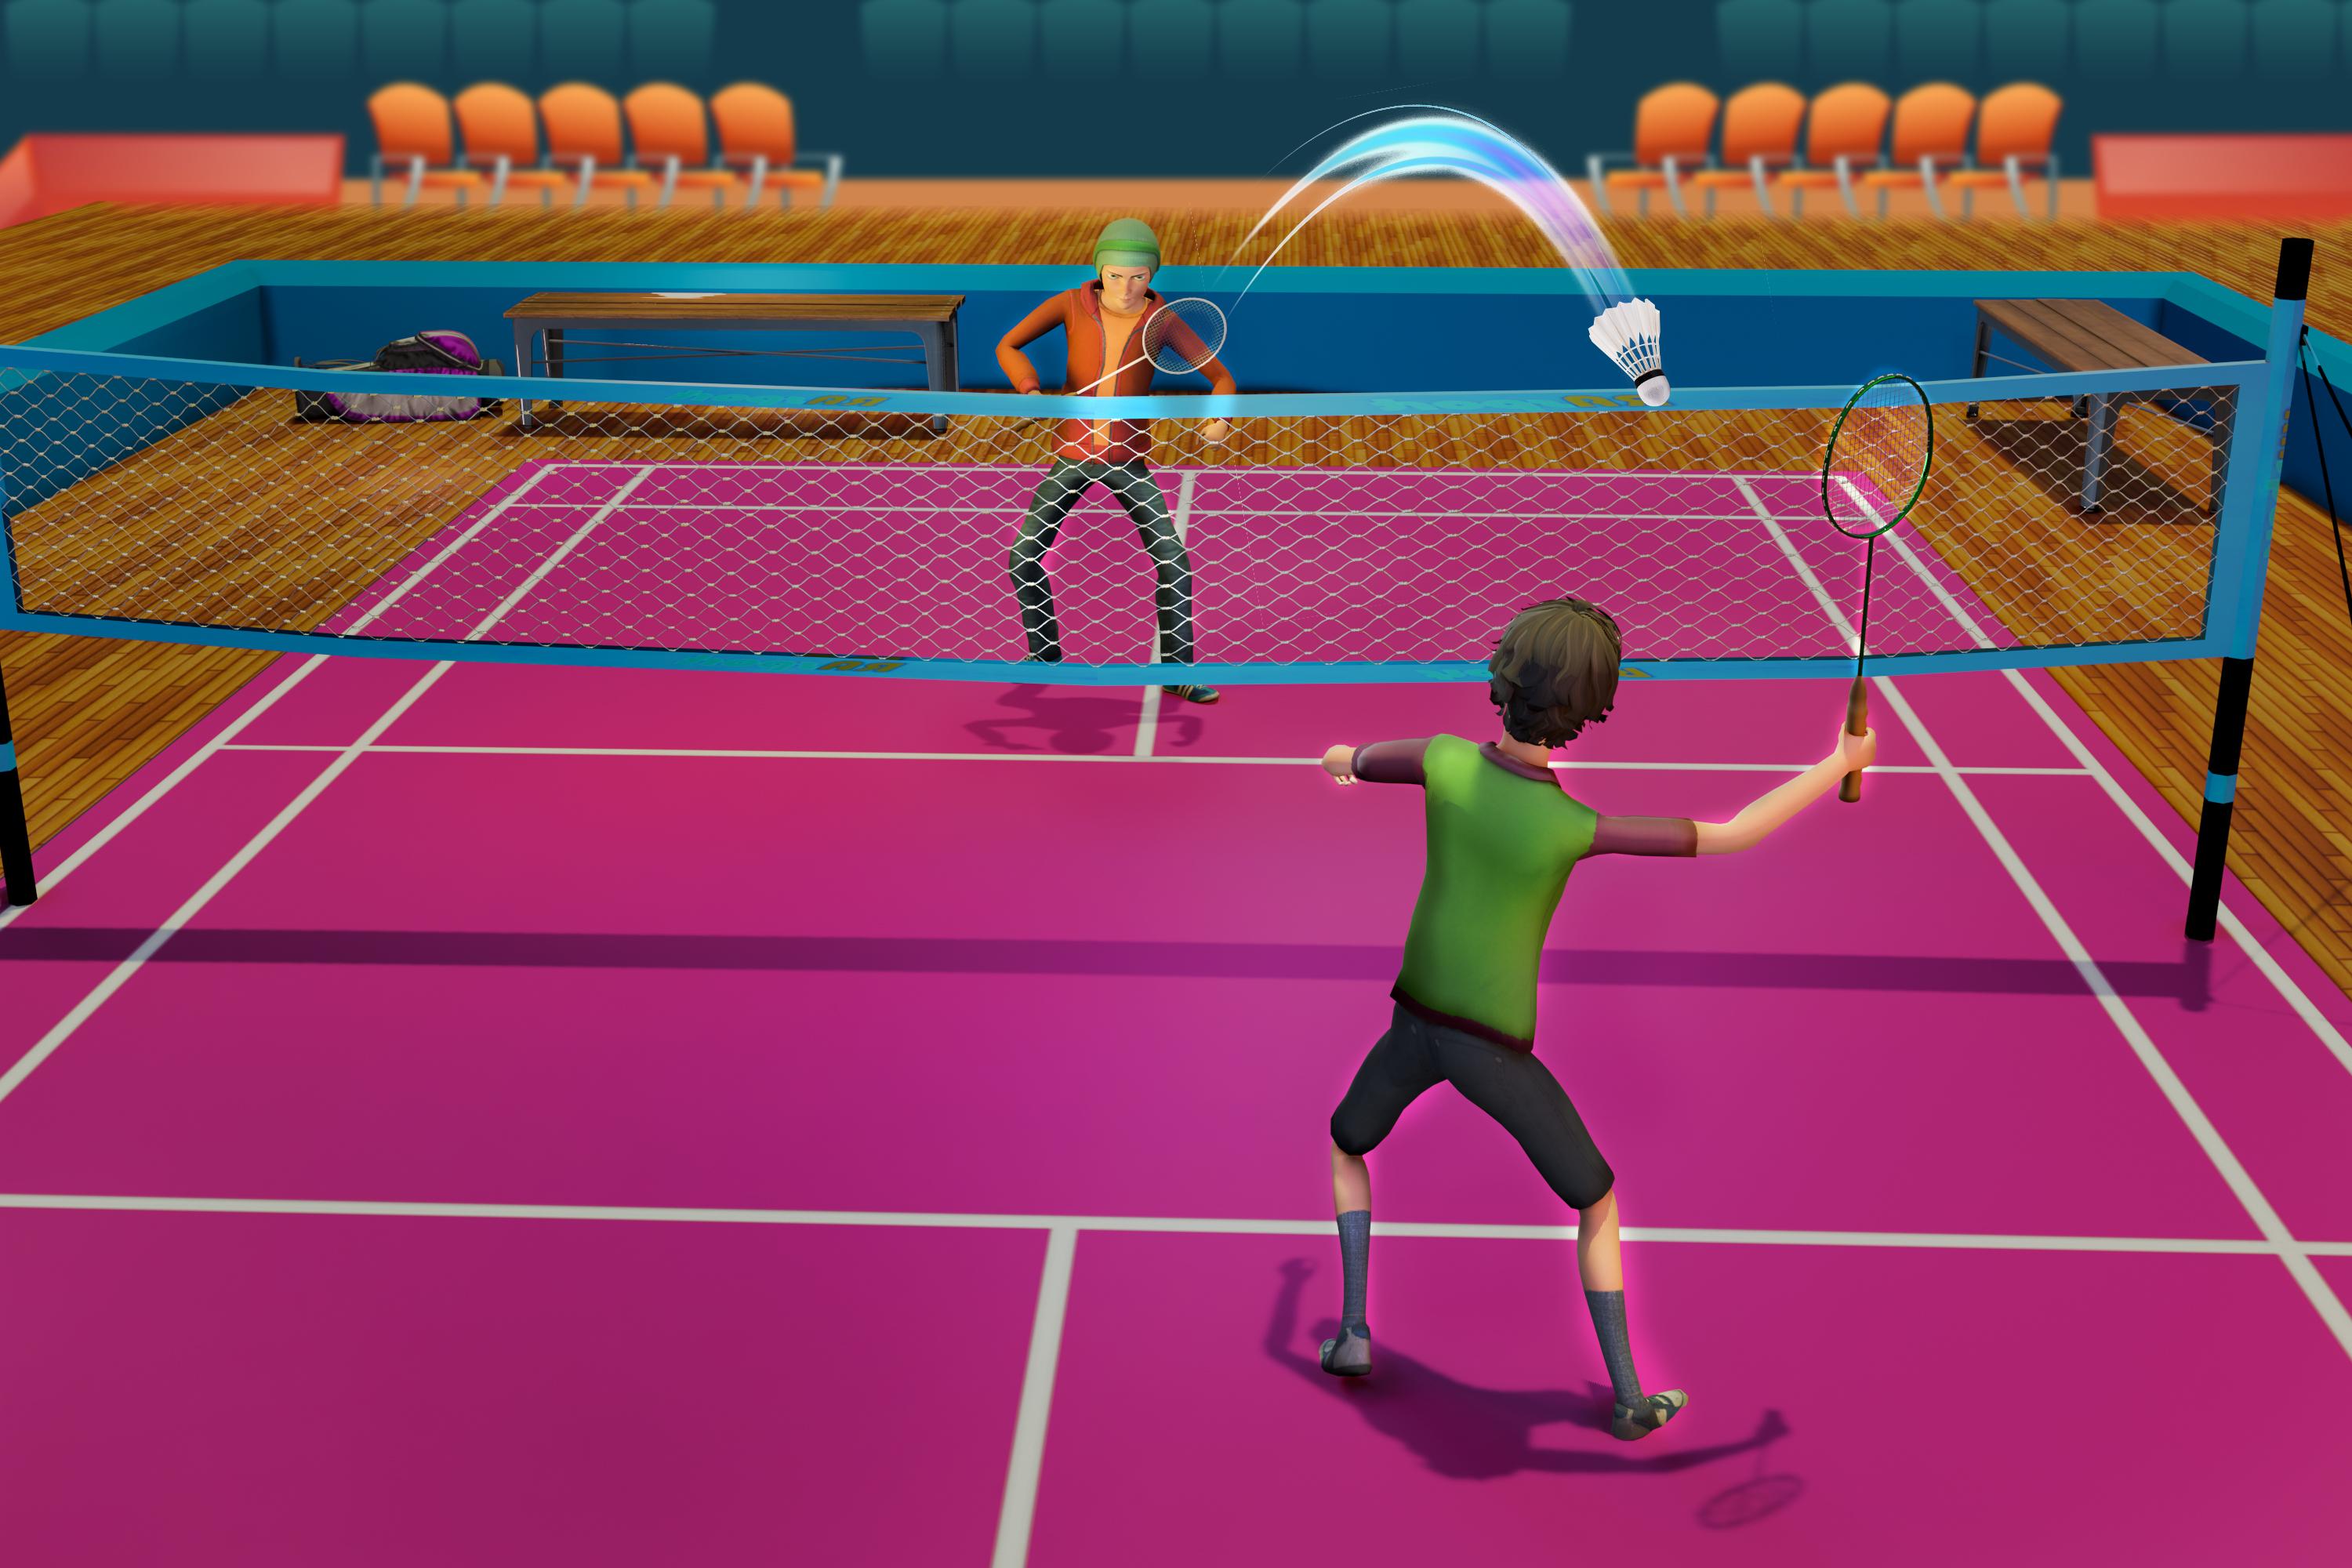 Badminton League Sports Game for Android - APK Download